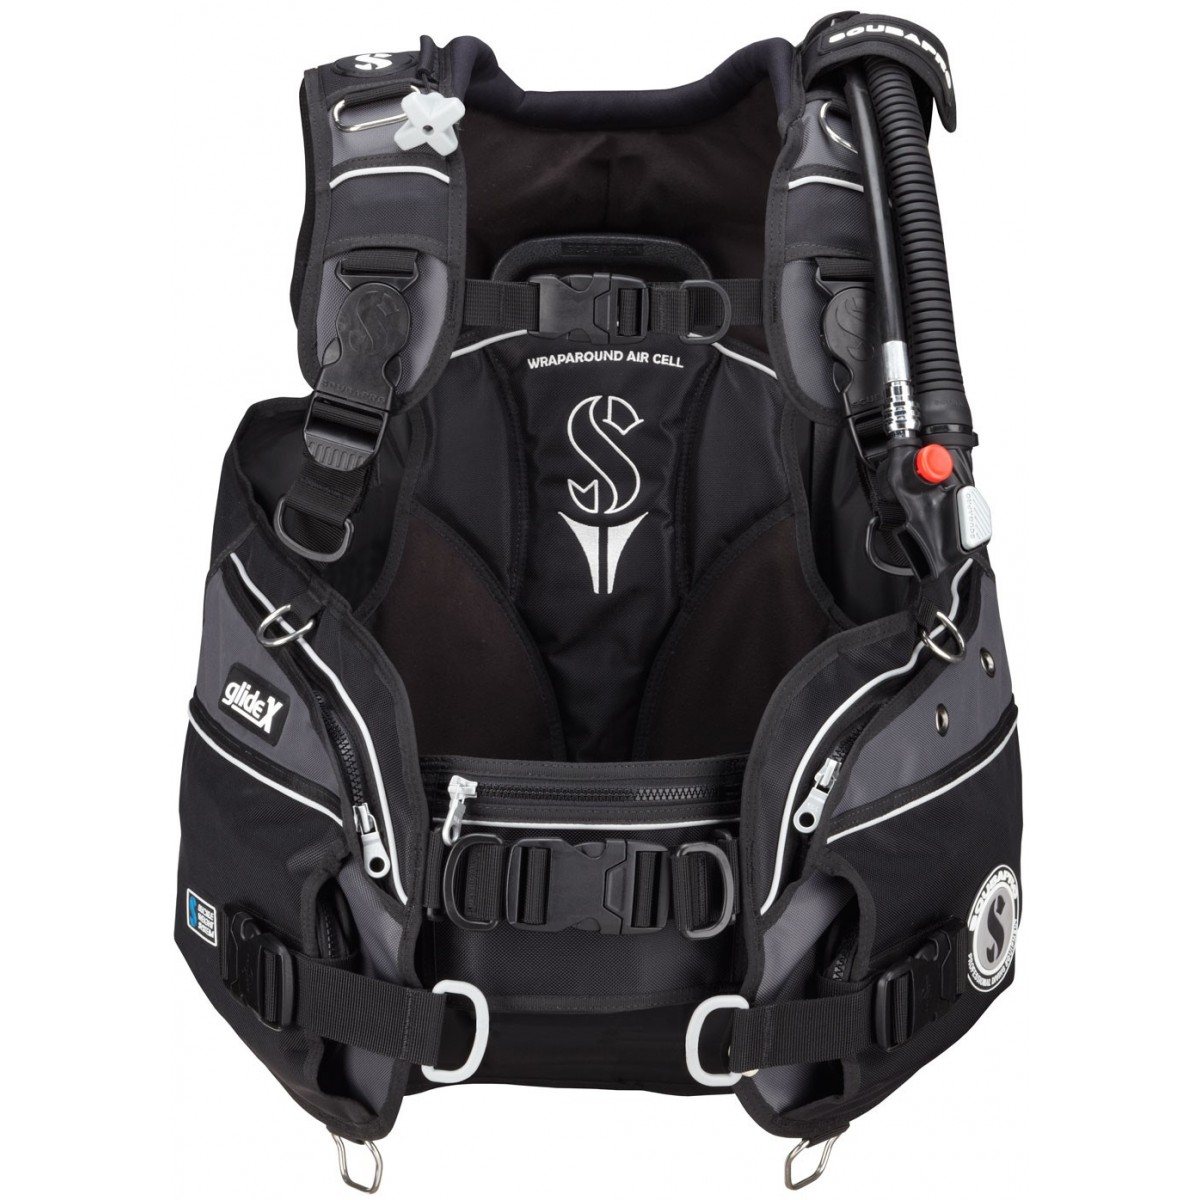 Scubapro Go Bcd With Air 2 Best Sale, 54% OFF | www.emanagreen.com